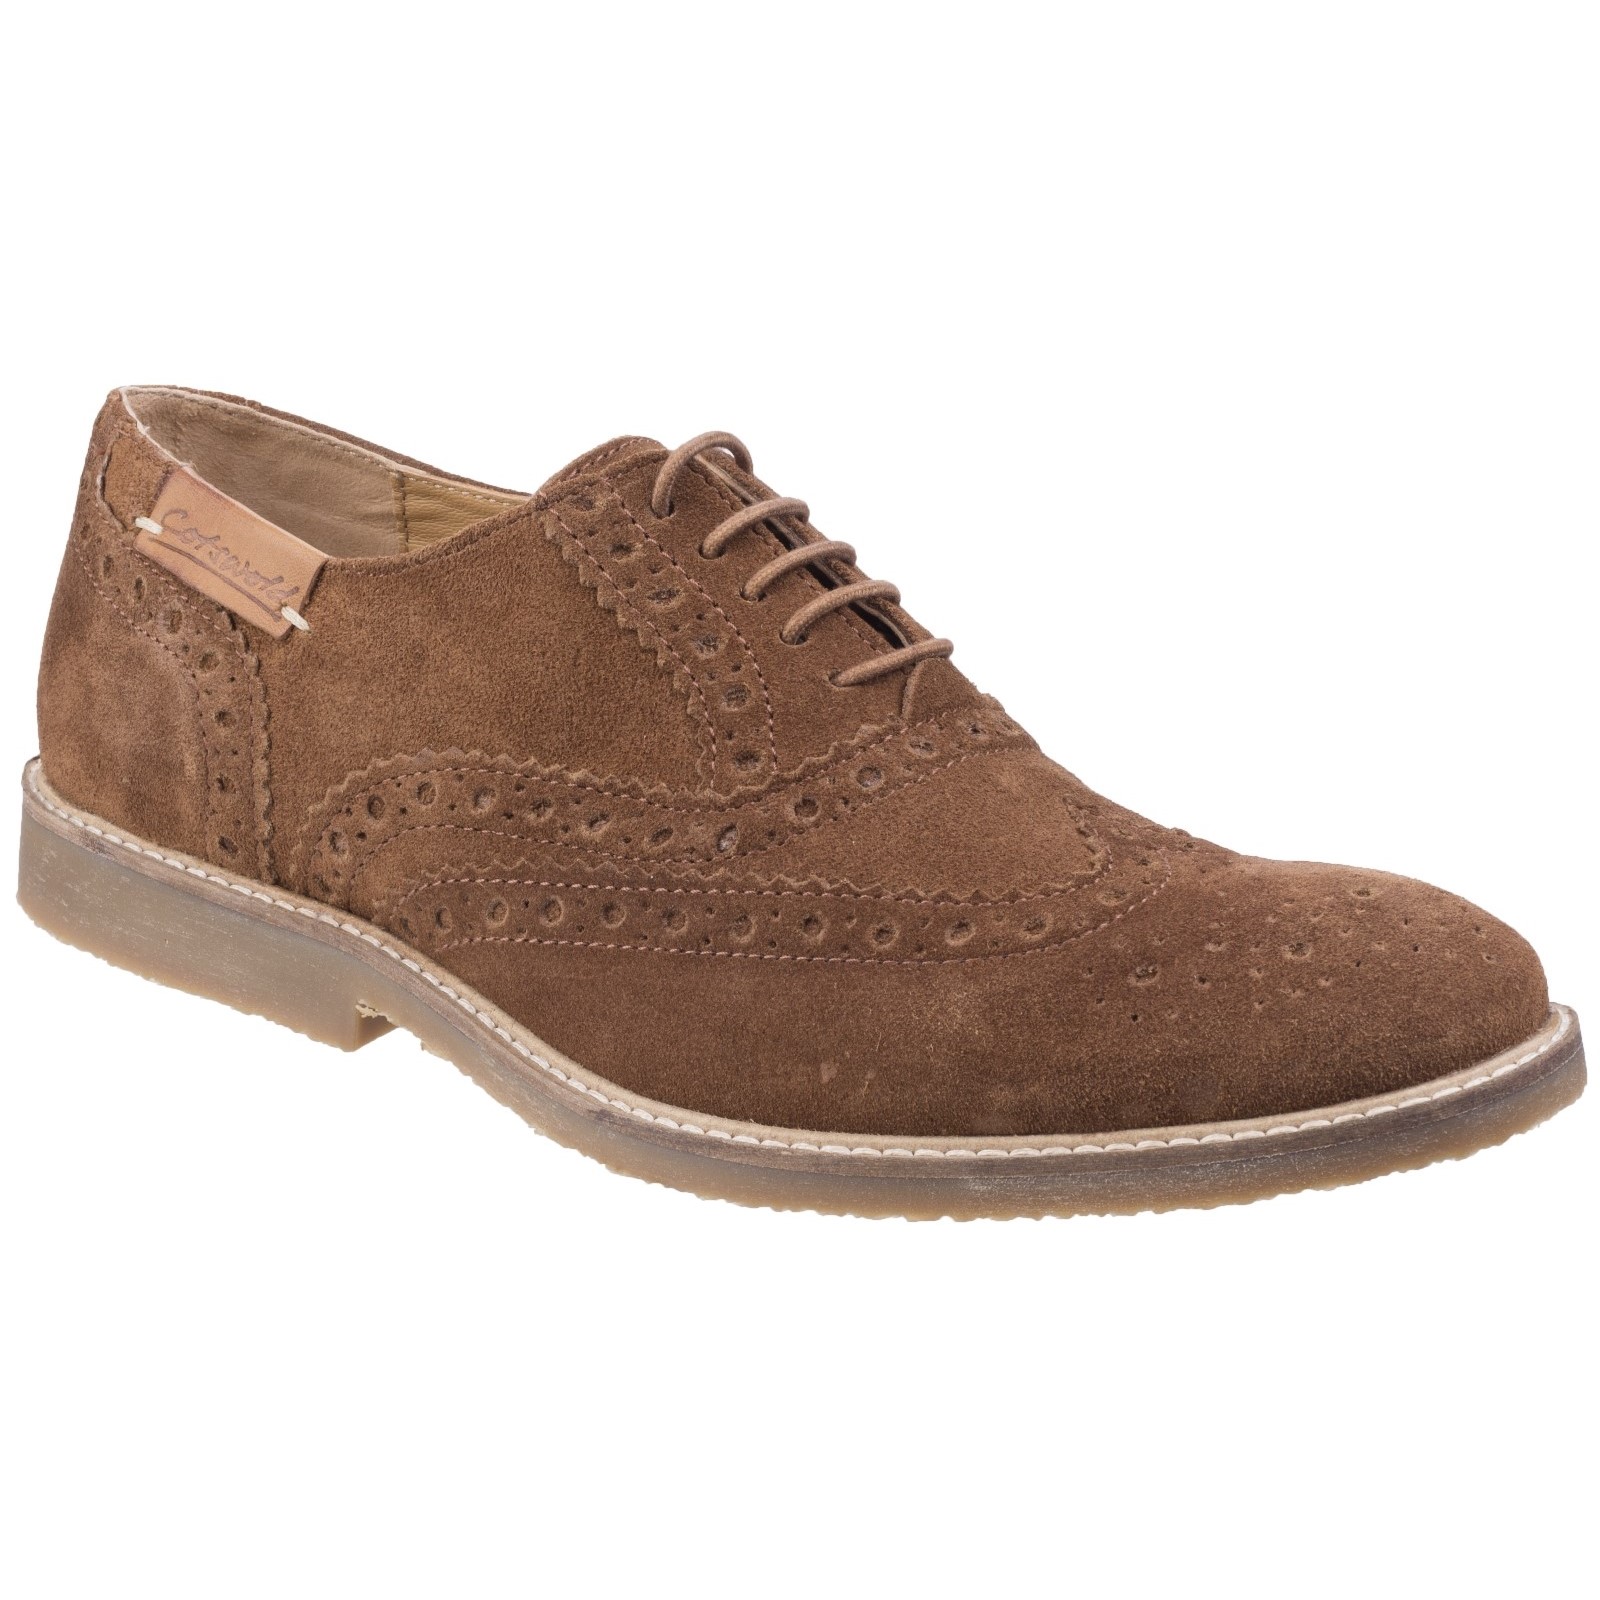 Chatsworth Suede Wingtip Shoes